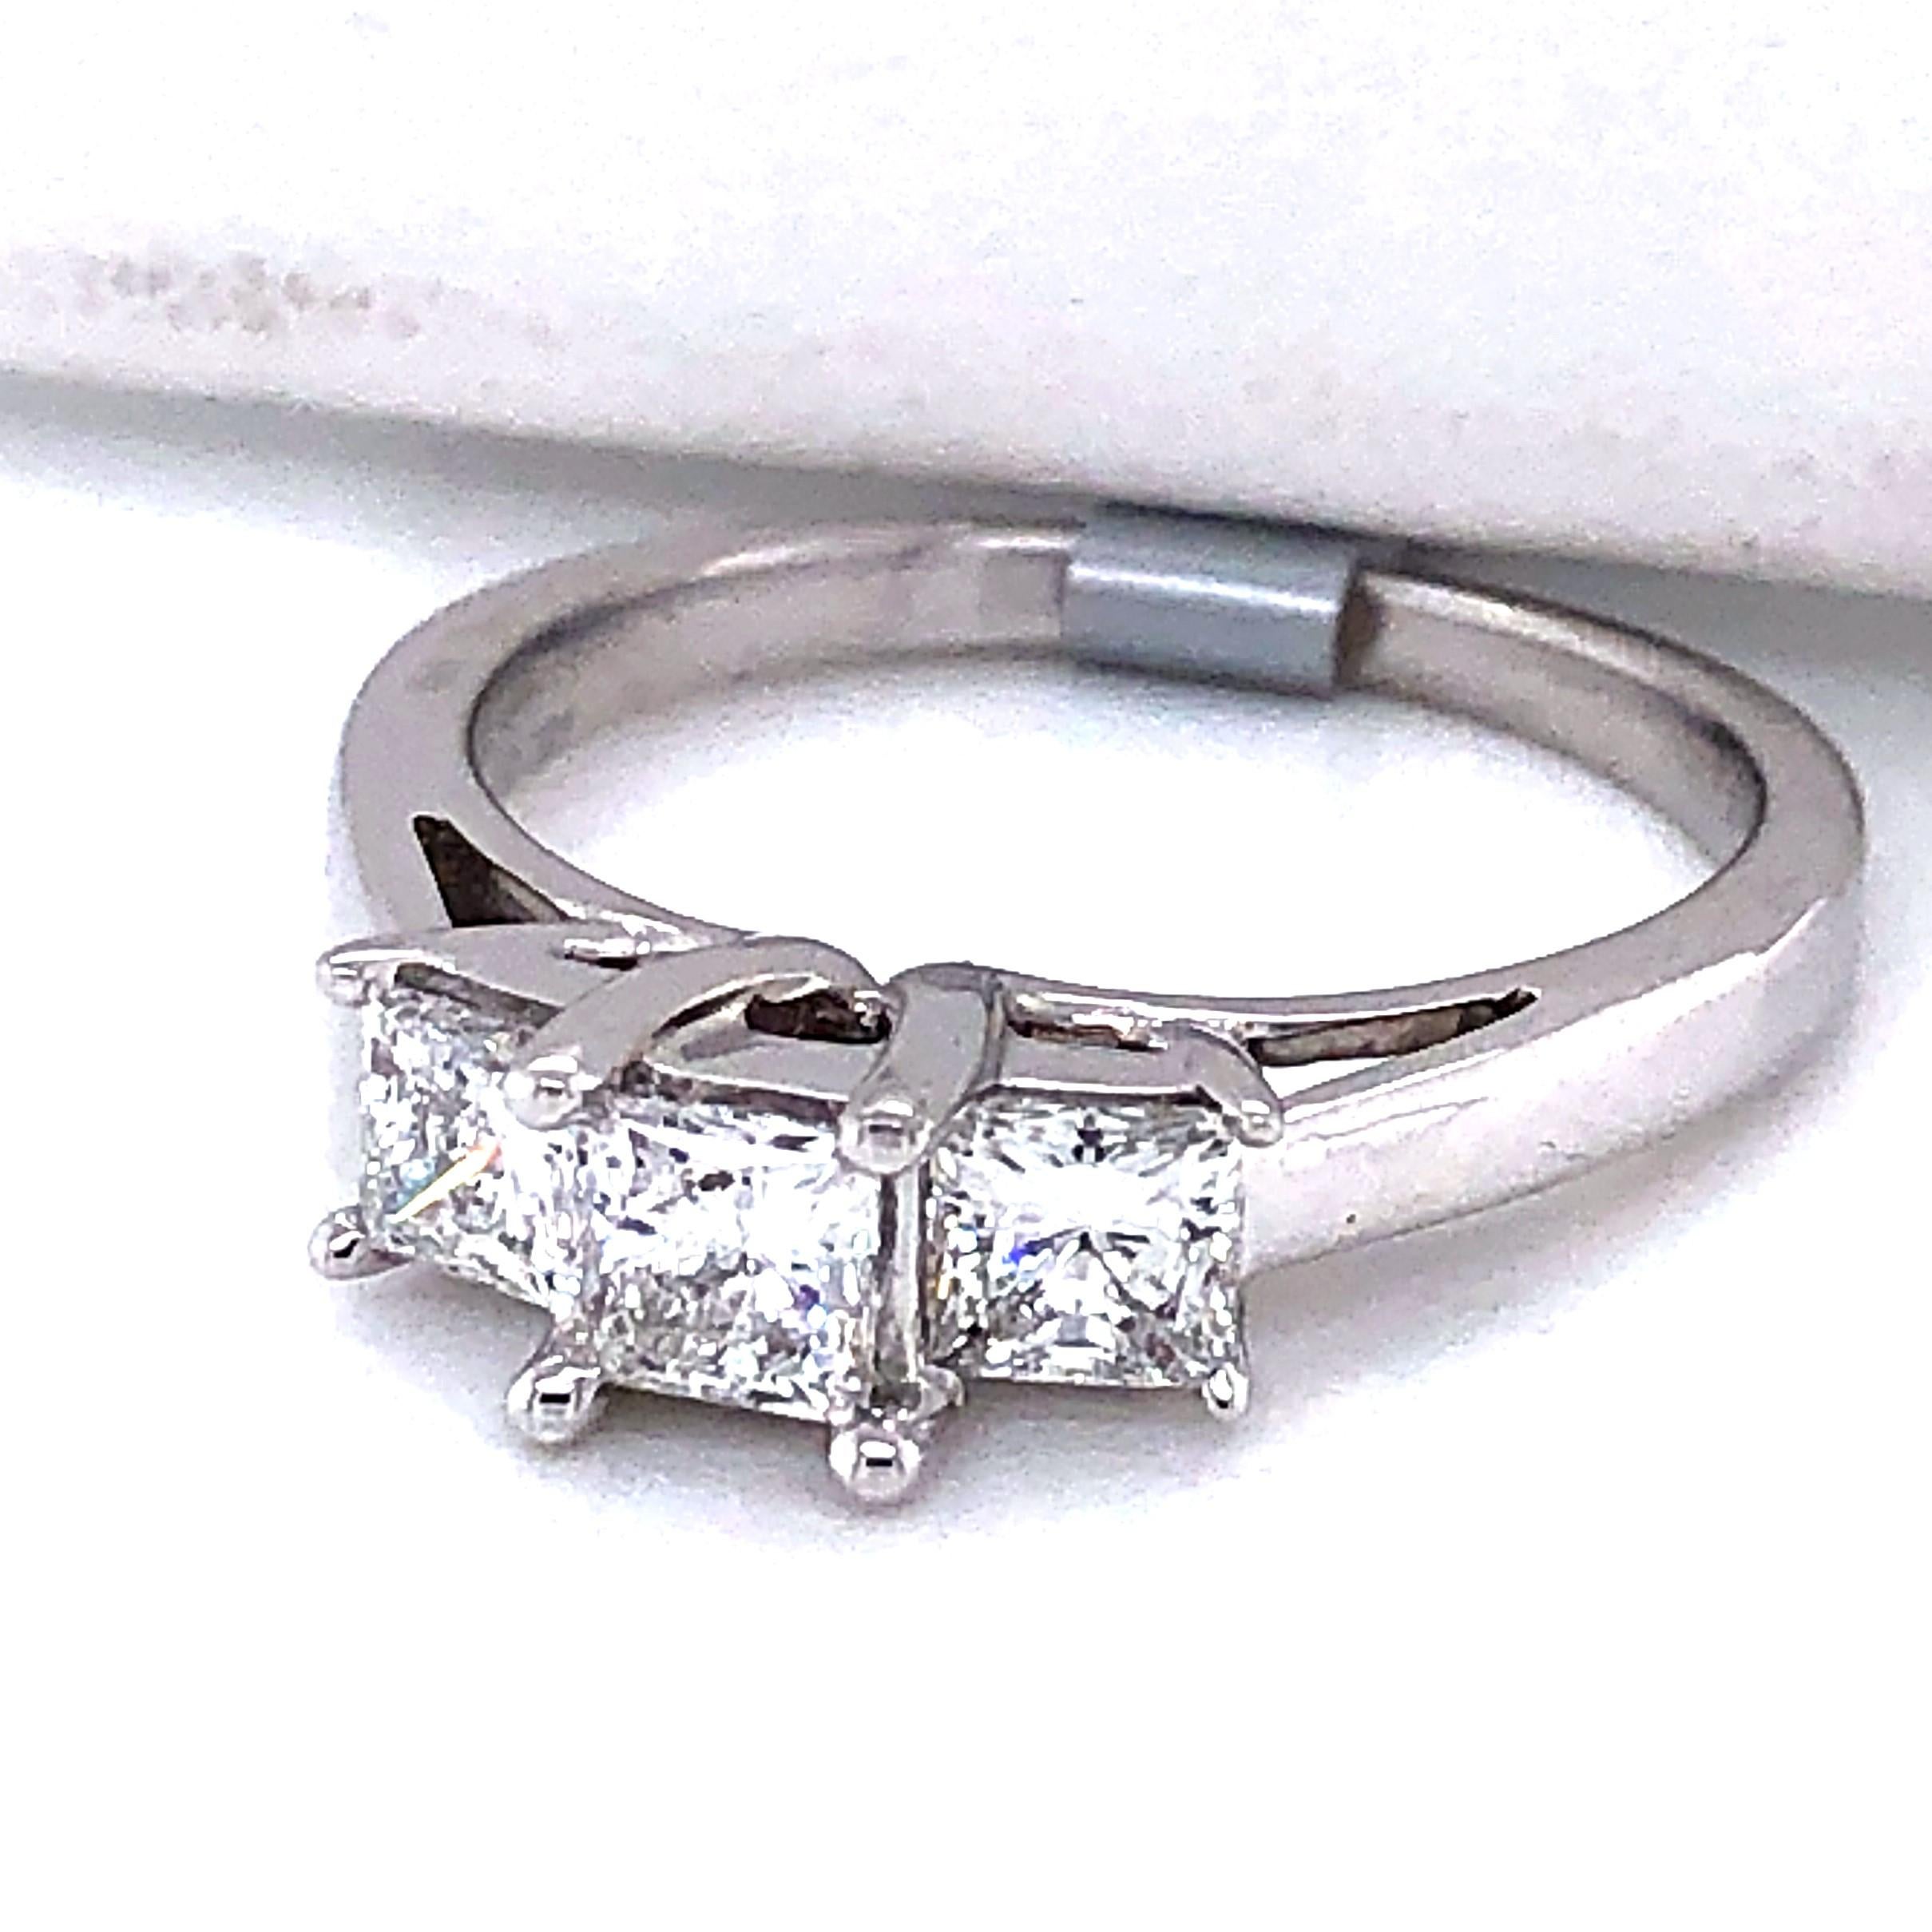 18 karat white gold (stamped 18K KRN CELEBRATION) set with a 3.9mm princess cut diamond in the center, approximately 0.38 carat wth H/I color and S11/SI2 clarity and two 3.7mm side princess cut diamonds, approximately 0.30 carat each with matching